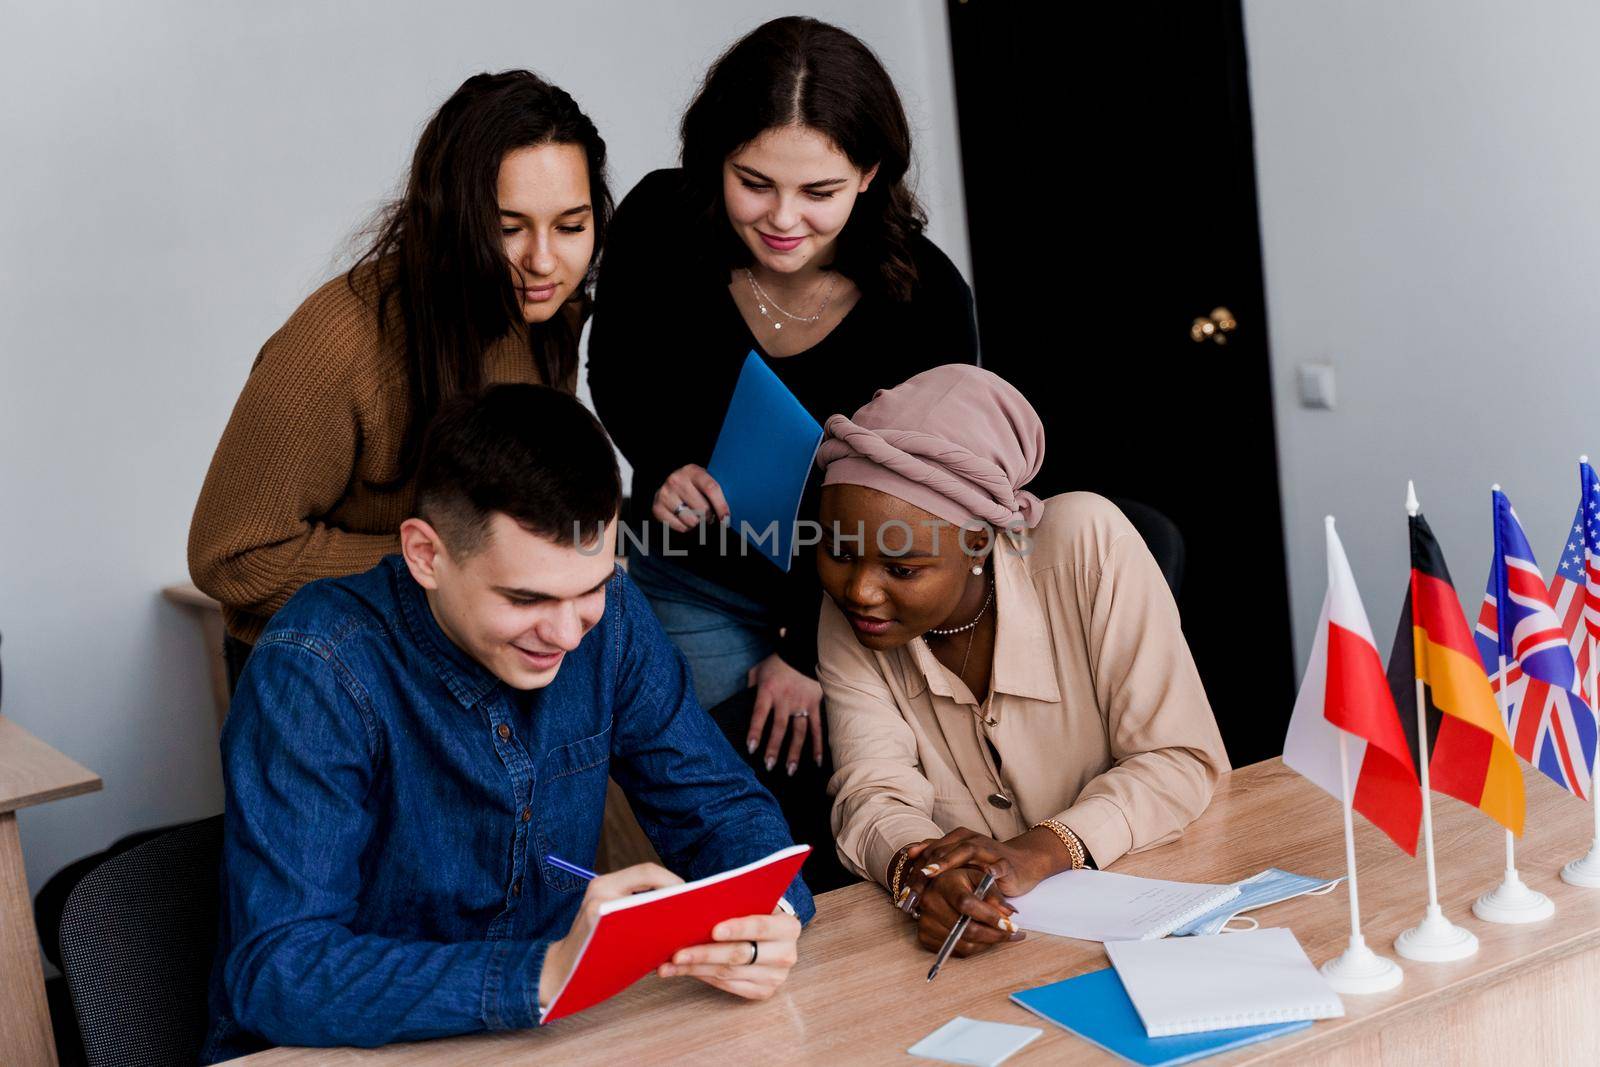 English class study with students from diffent countries: Poland, Germany, USA. Teamwork. Working in multiethnic students. Teacher study foreign languages together in class. Studing with laptop.